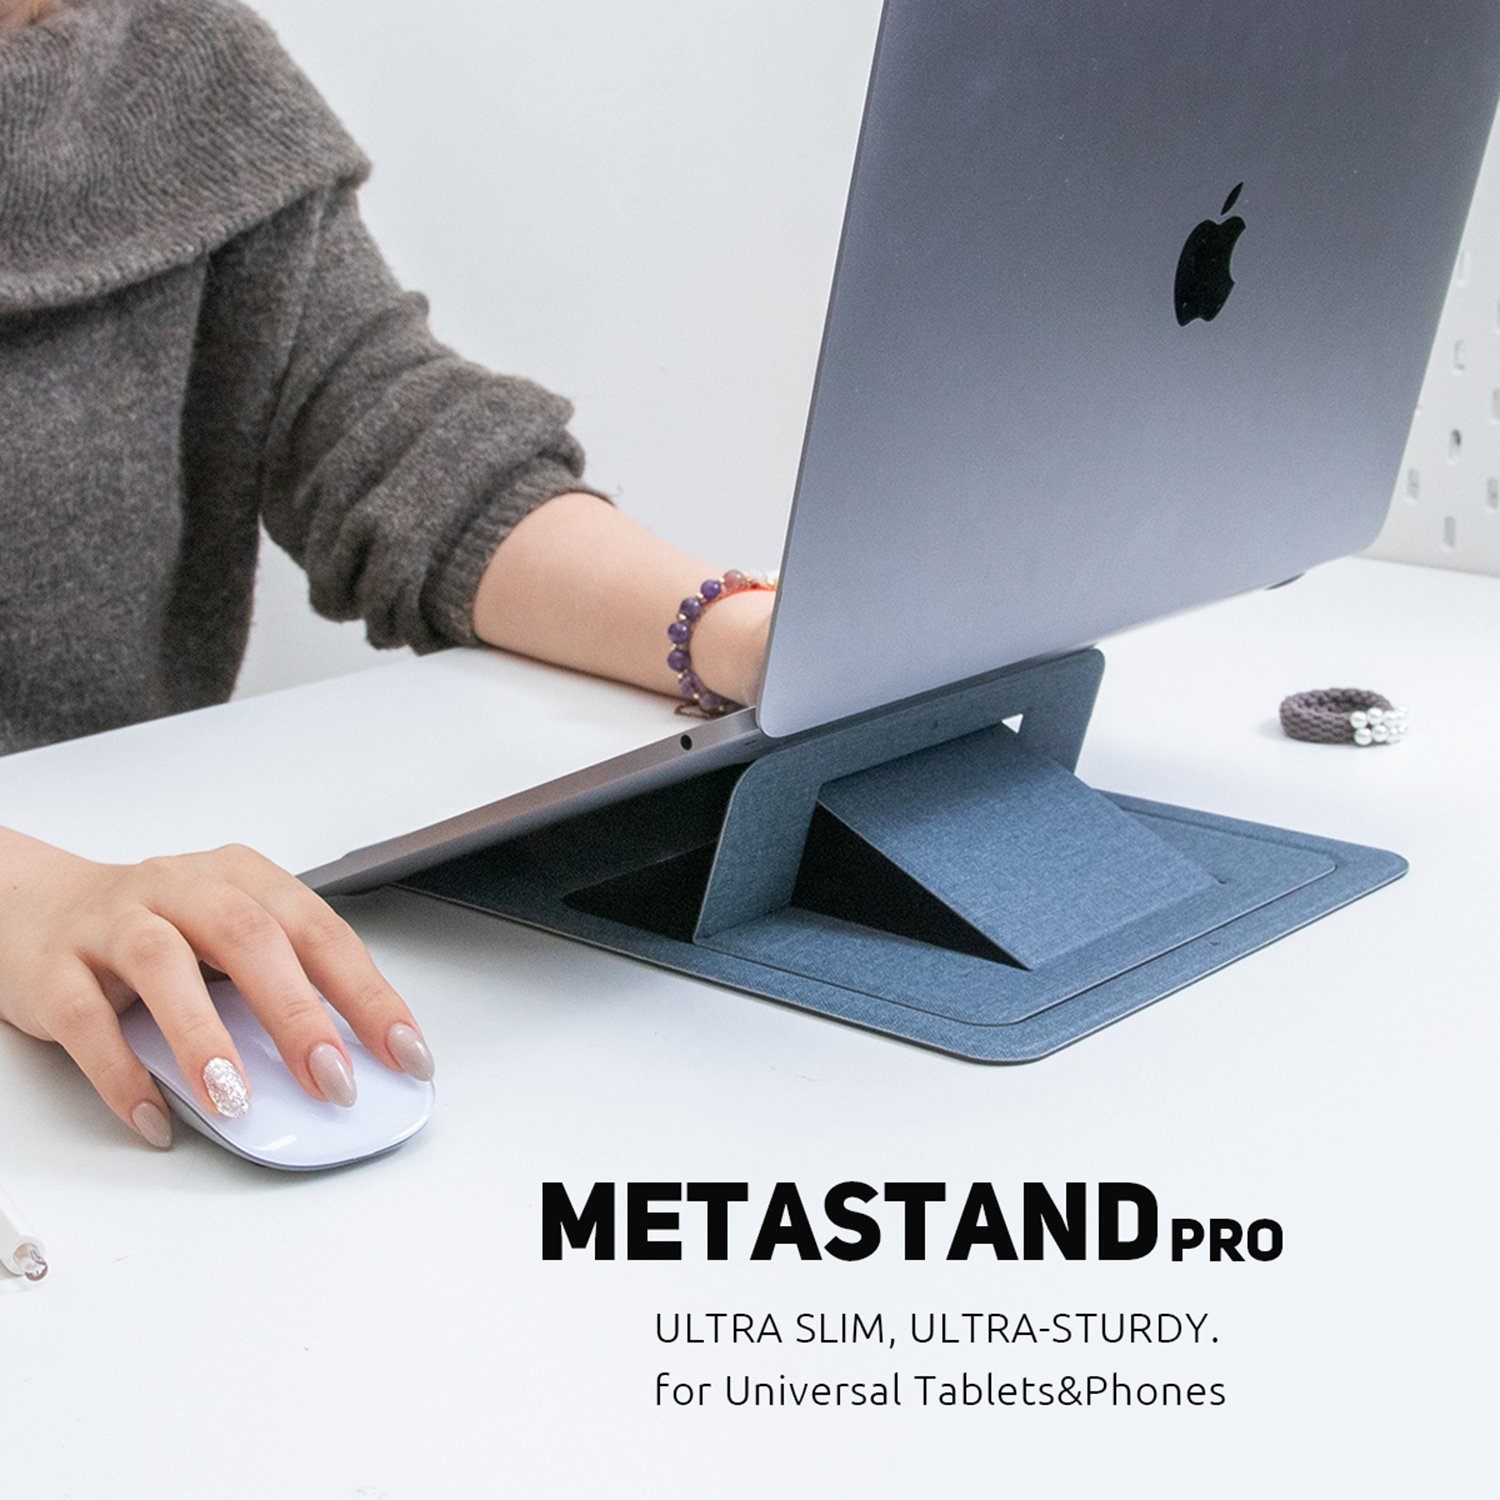 Ergomi Meta Pro Portable & Foldable Laptop Stand Paper-Thin Higher Angle for Laptop Tablet Mouse Pad Default Ergomi 